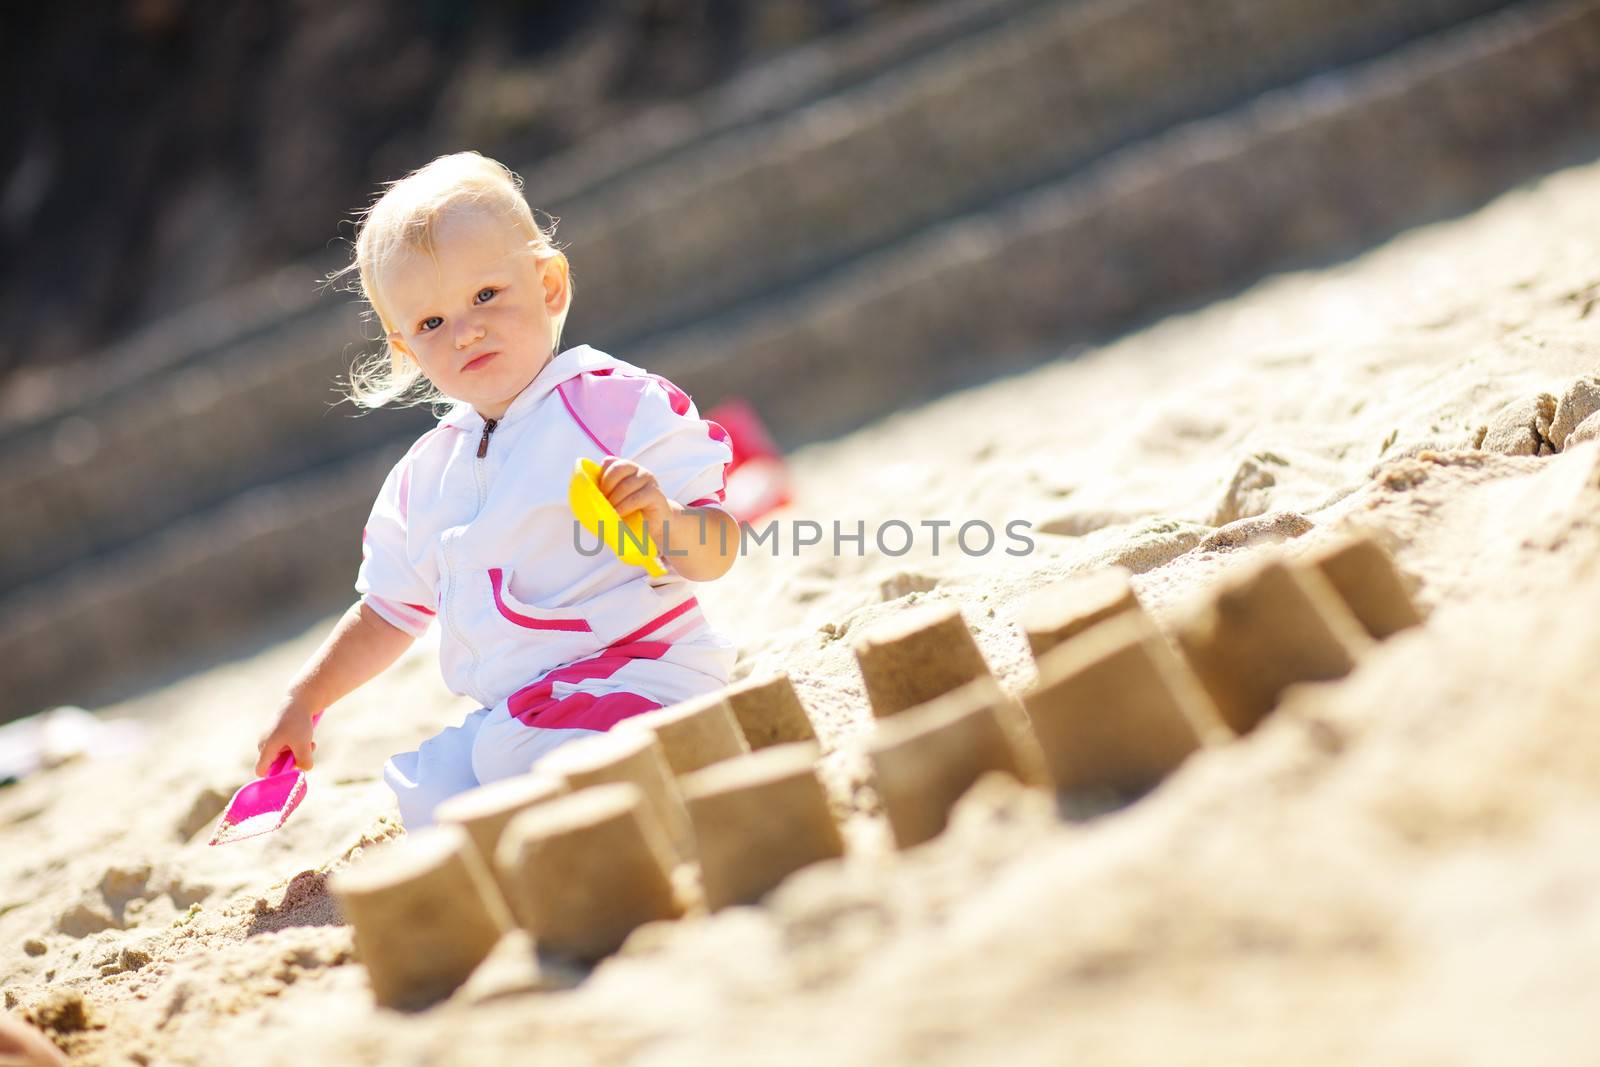 playing on the sand child by vsurkov